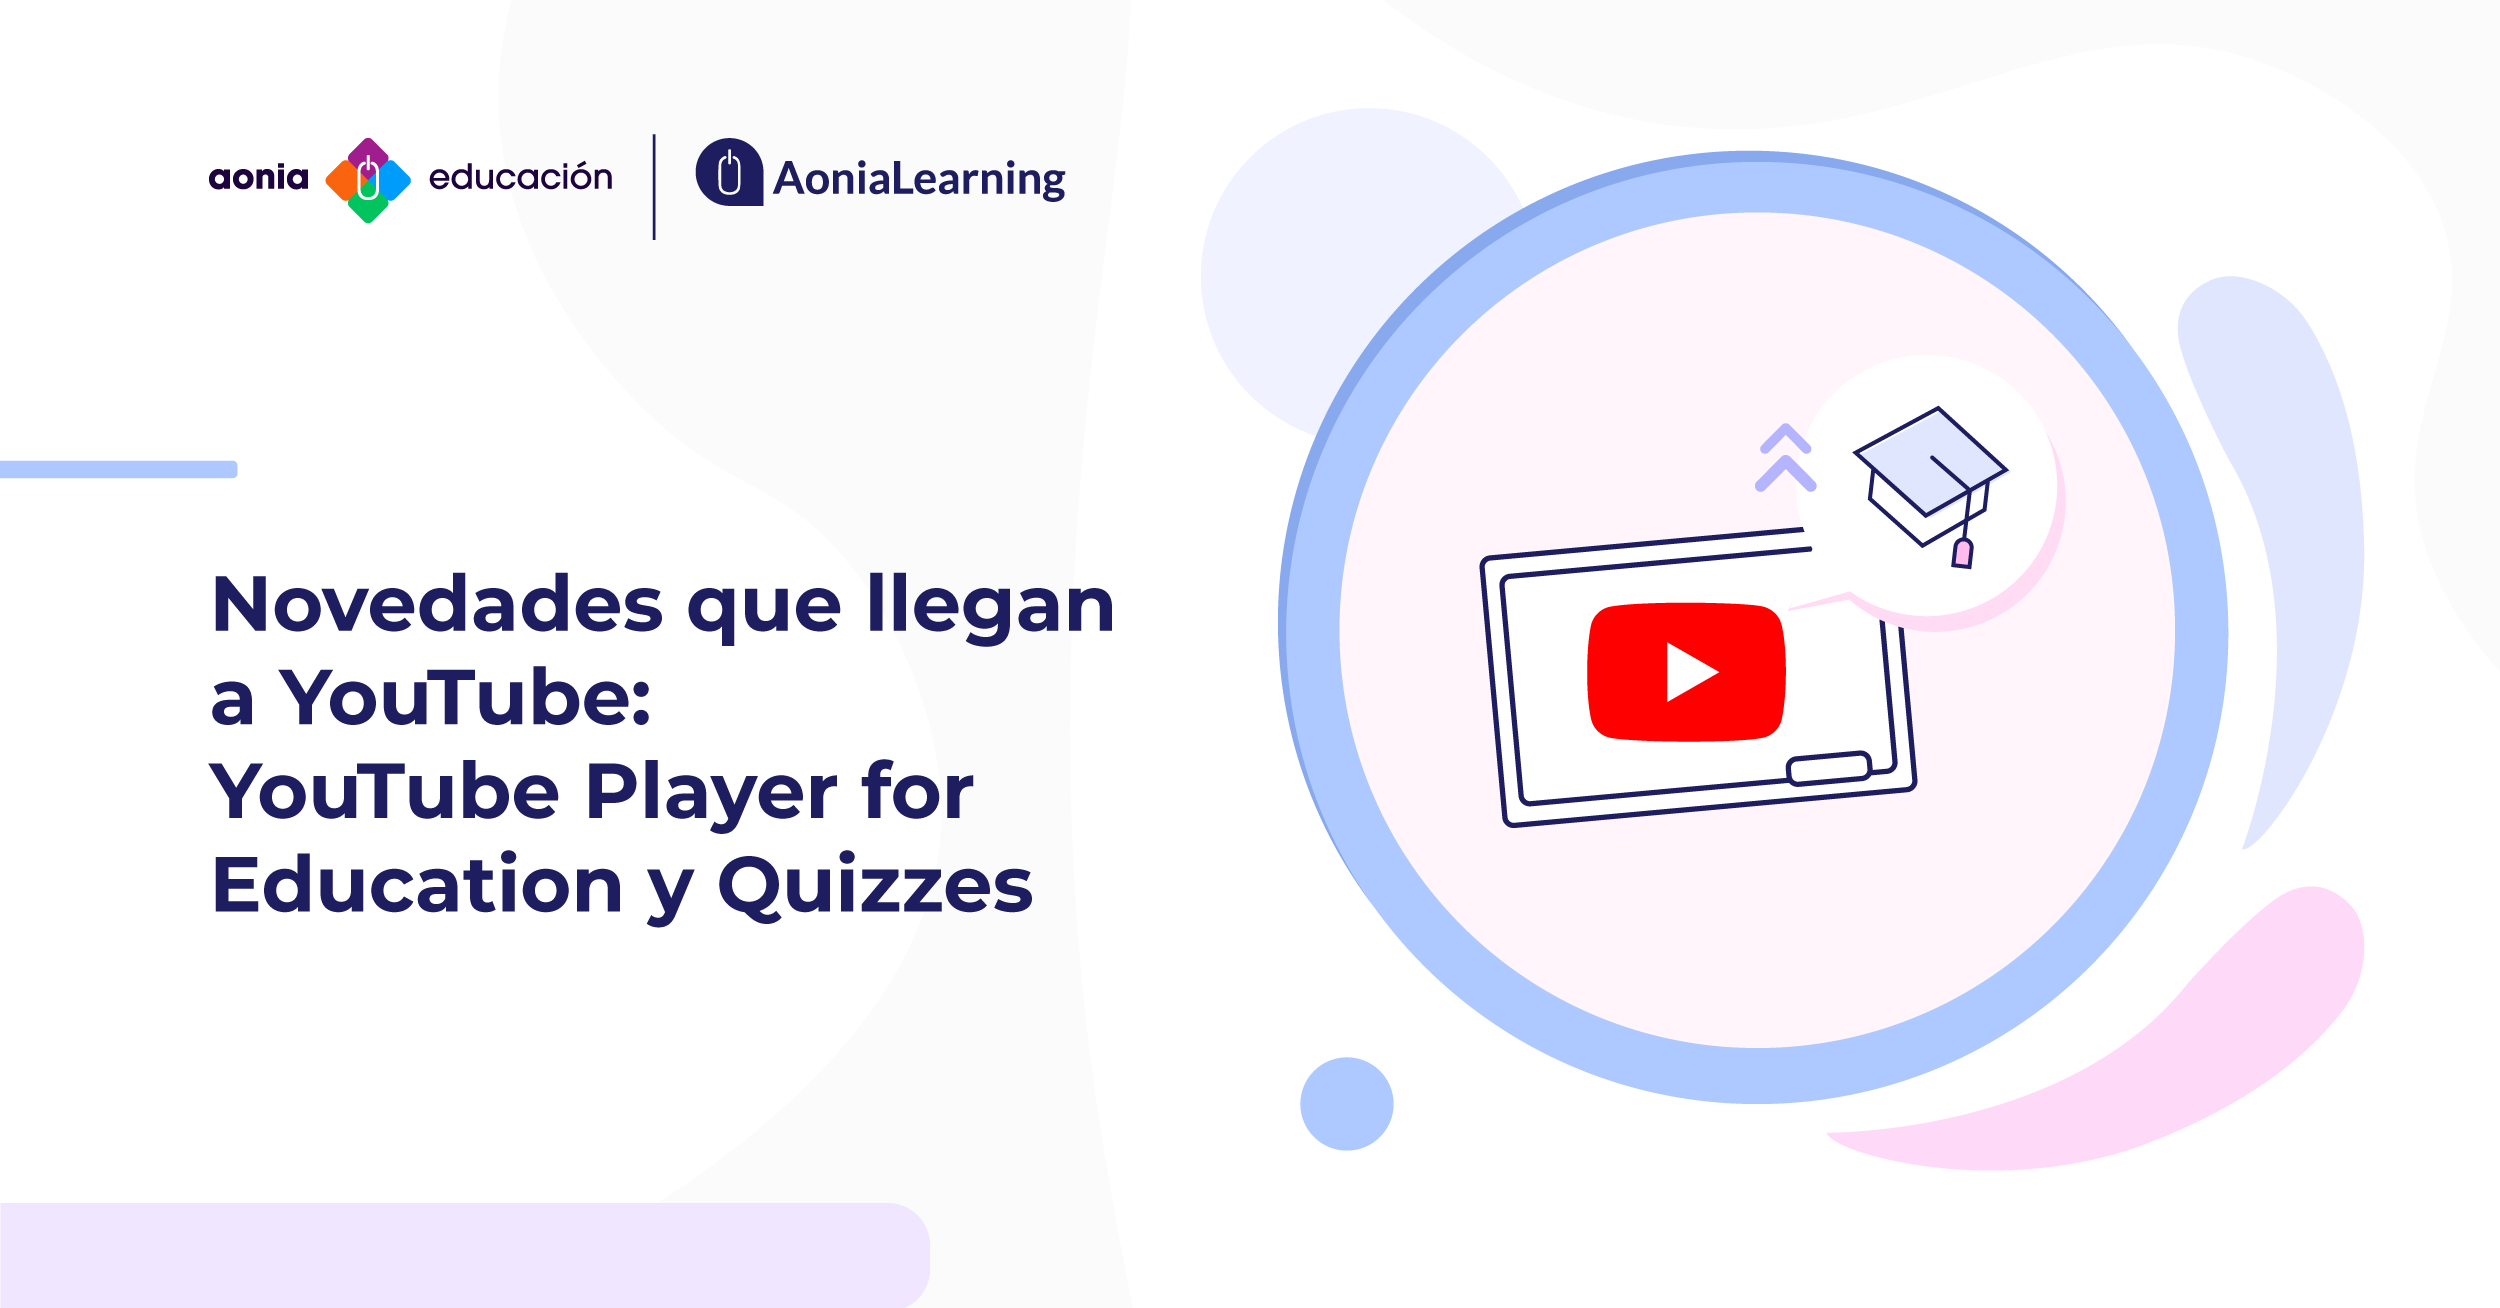 Novedades que llegan a YouTube: YouTube Player for Education y Quizzes